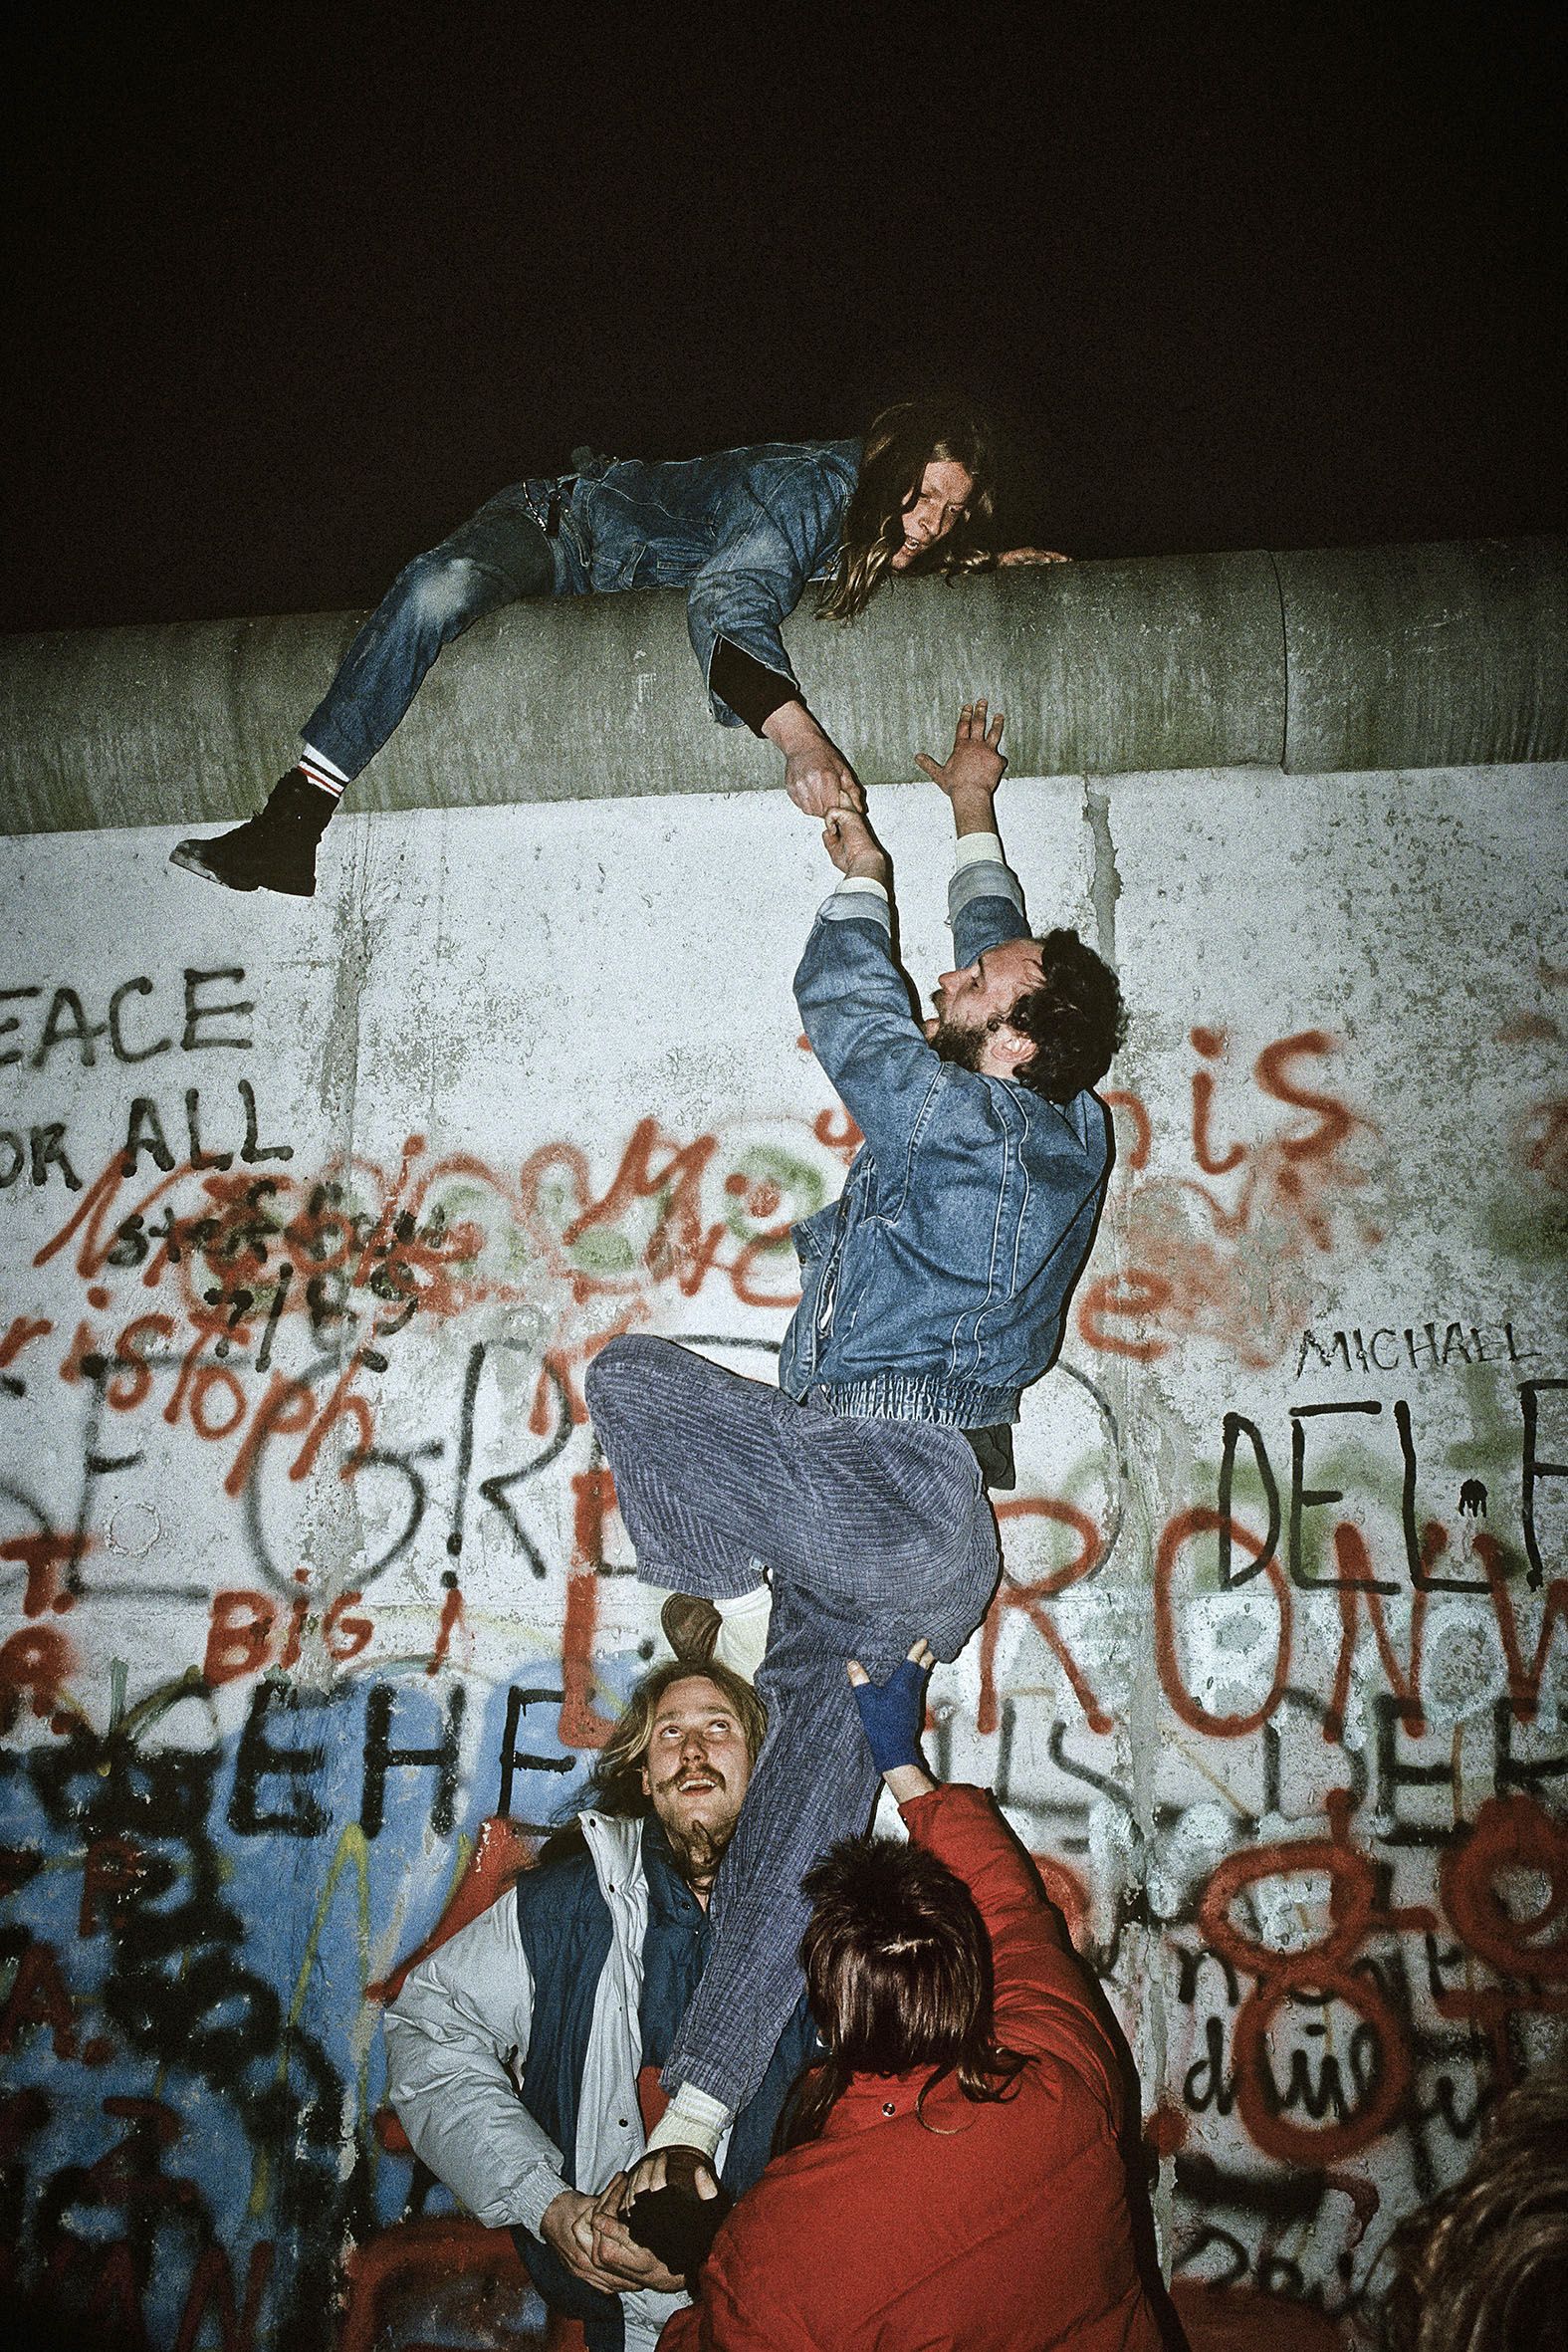 Muro Berlino, Berlin, 1980-1990, from cold war to the fall of the wall